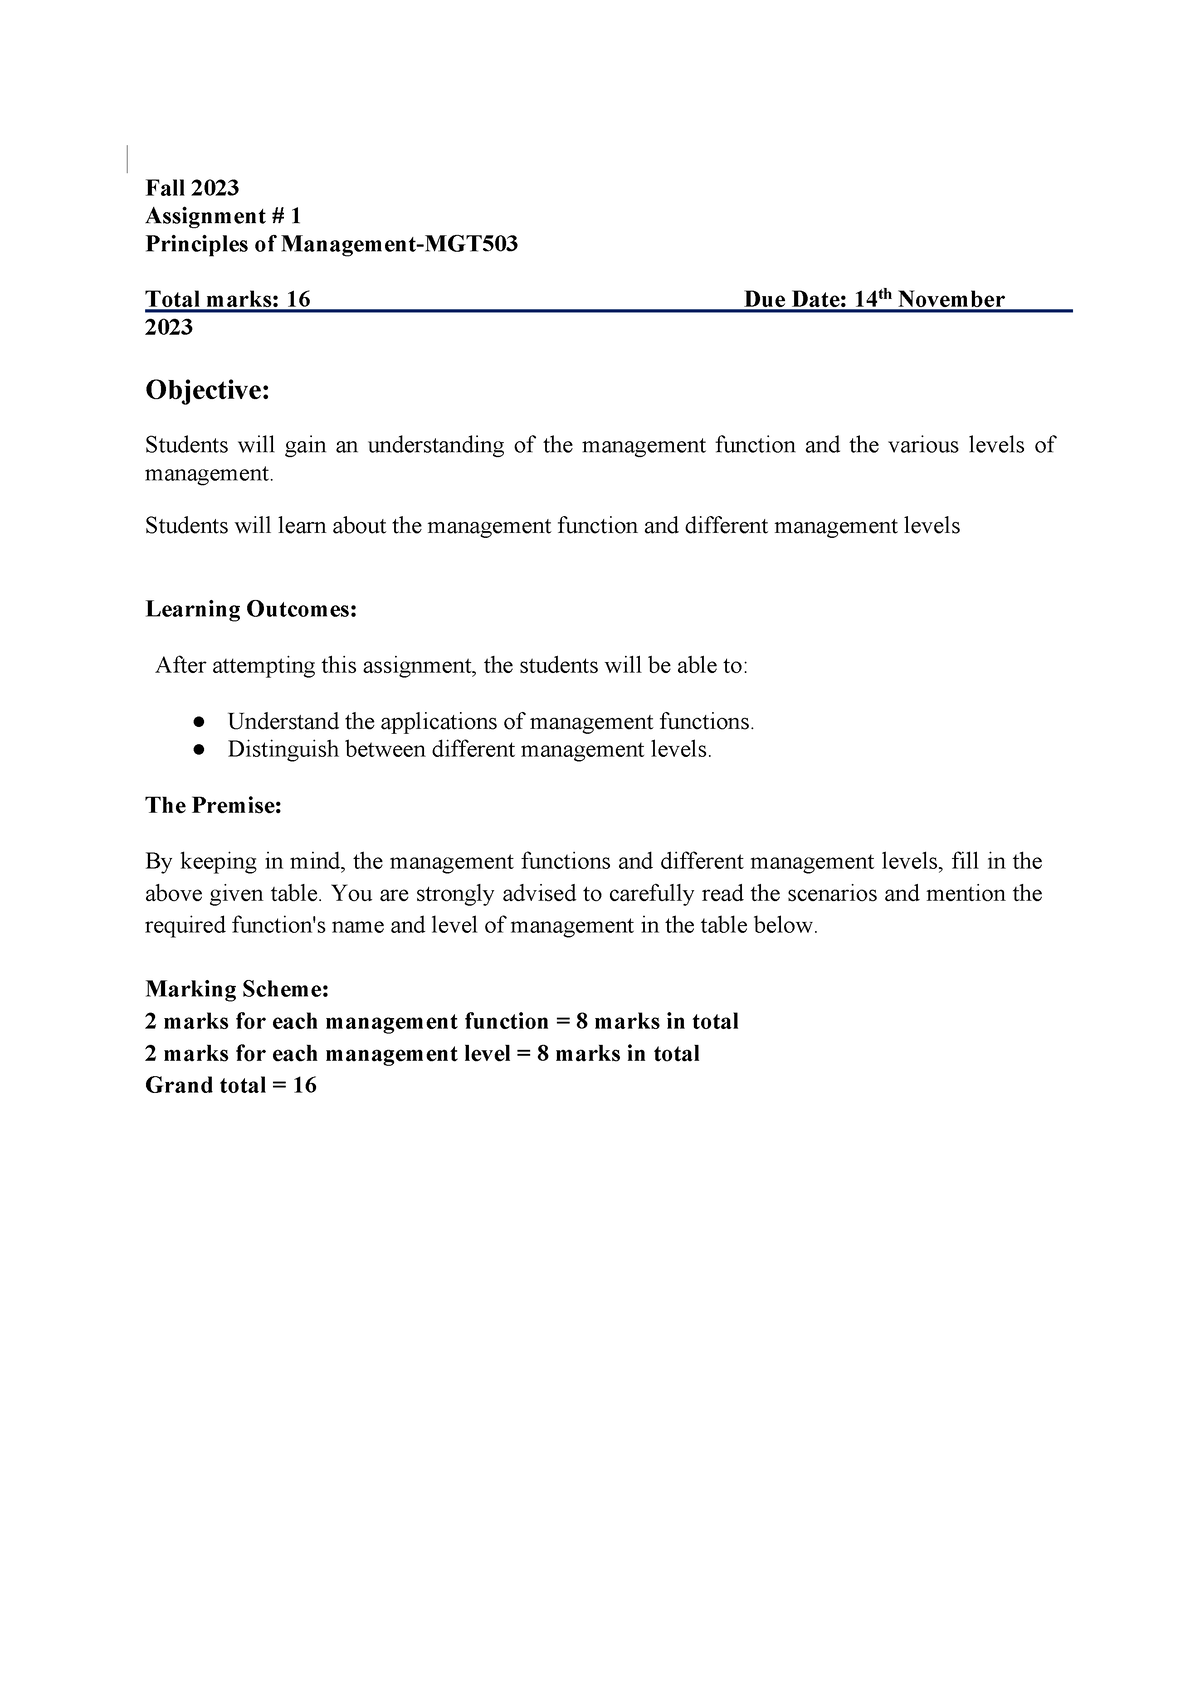 principles of management (mgt503) assignment no. 1 solution